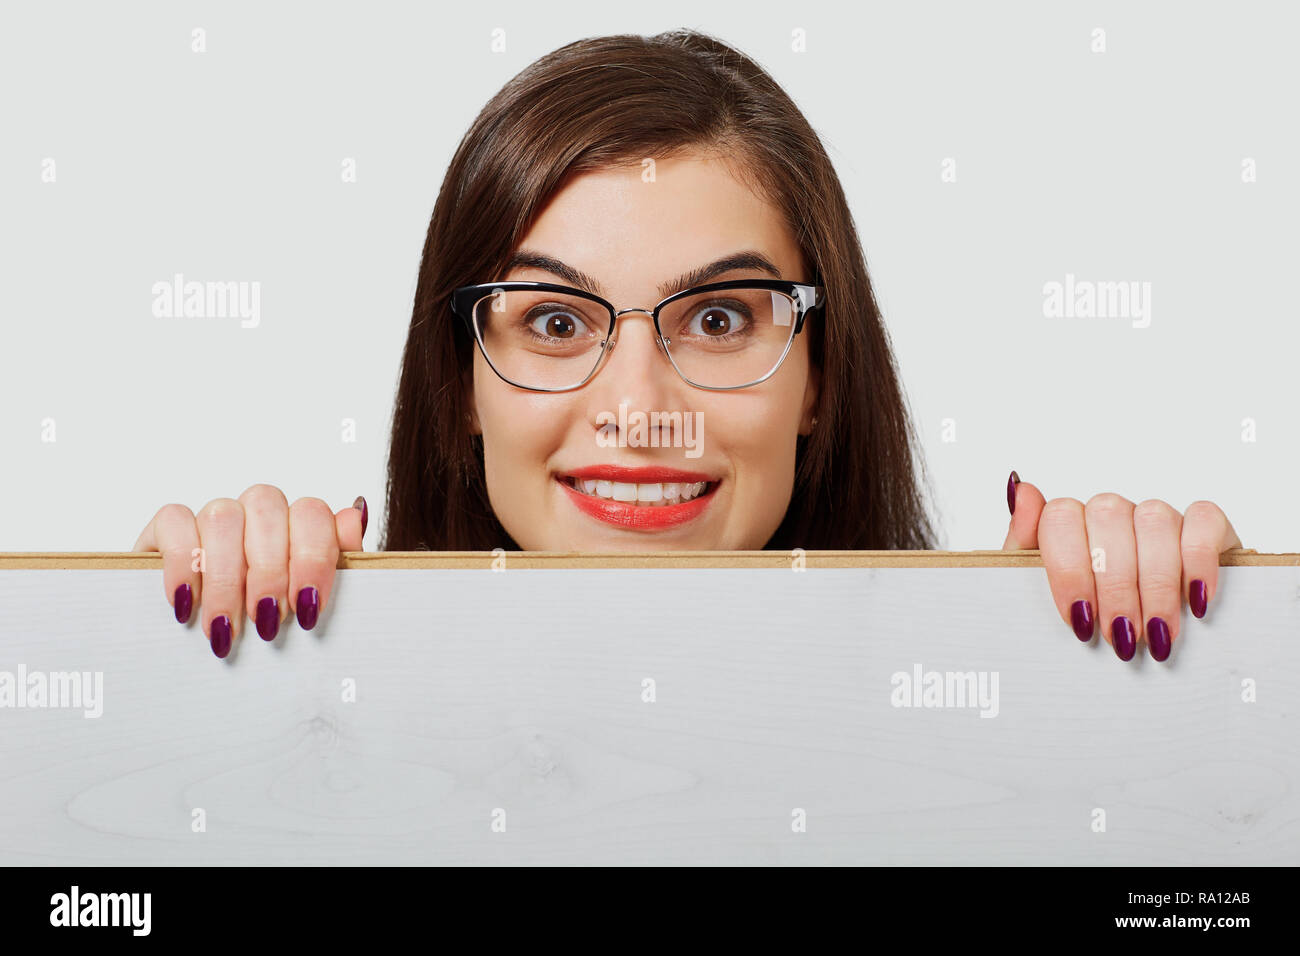 Excited woman behind wood board Stock Photo